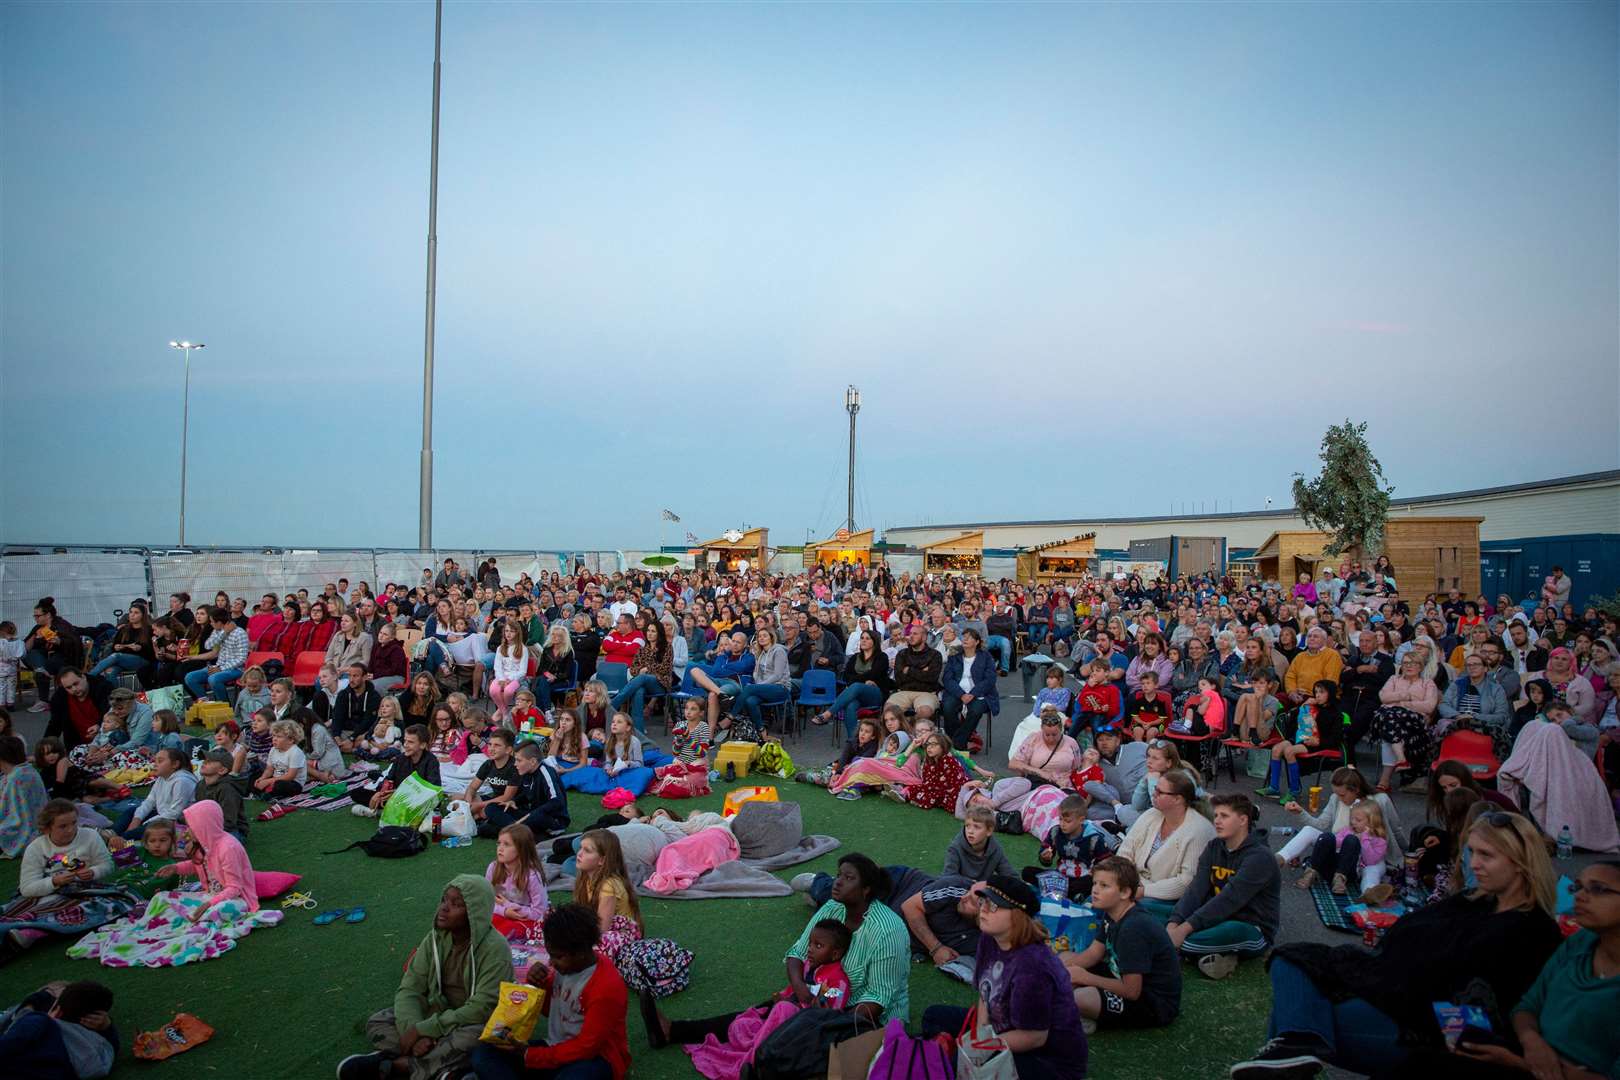 The Greatest Showman screening on the Harbour Arm last year. Picture credit: Andy Aitchison